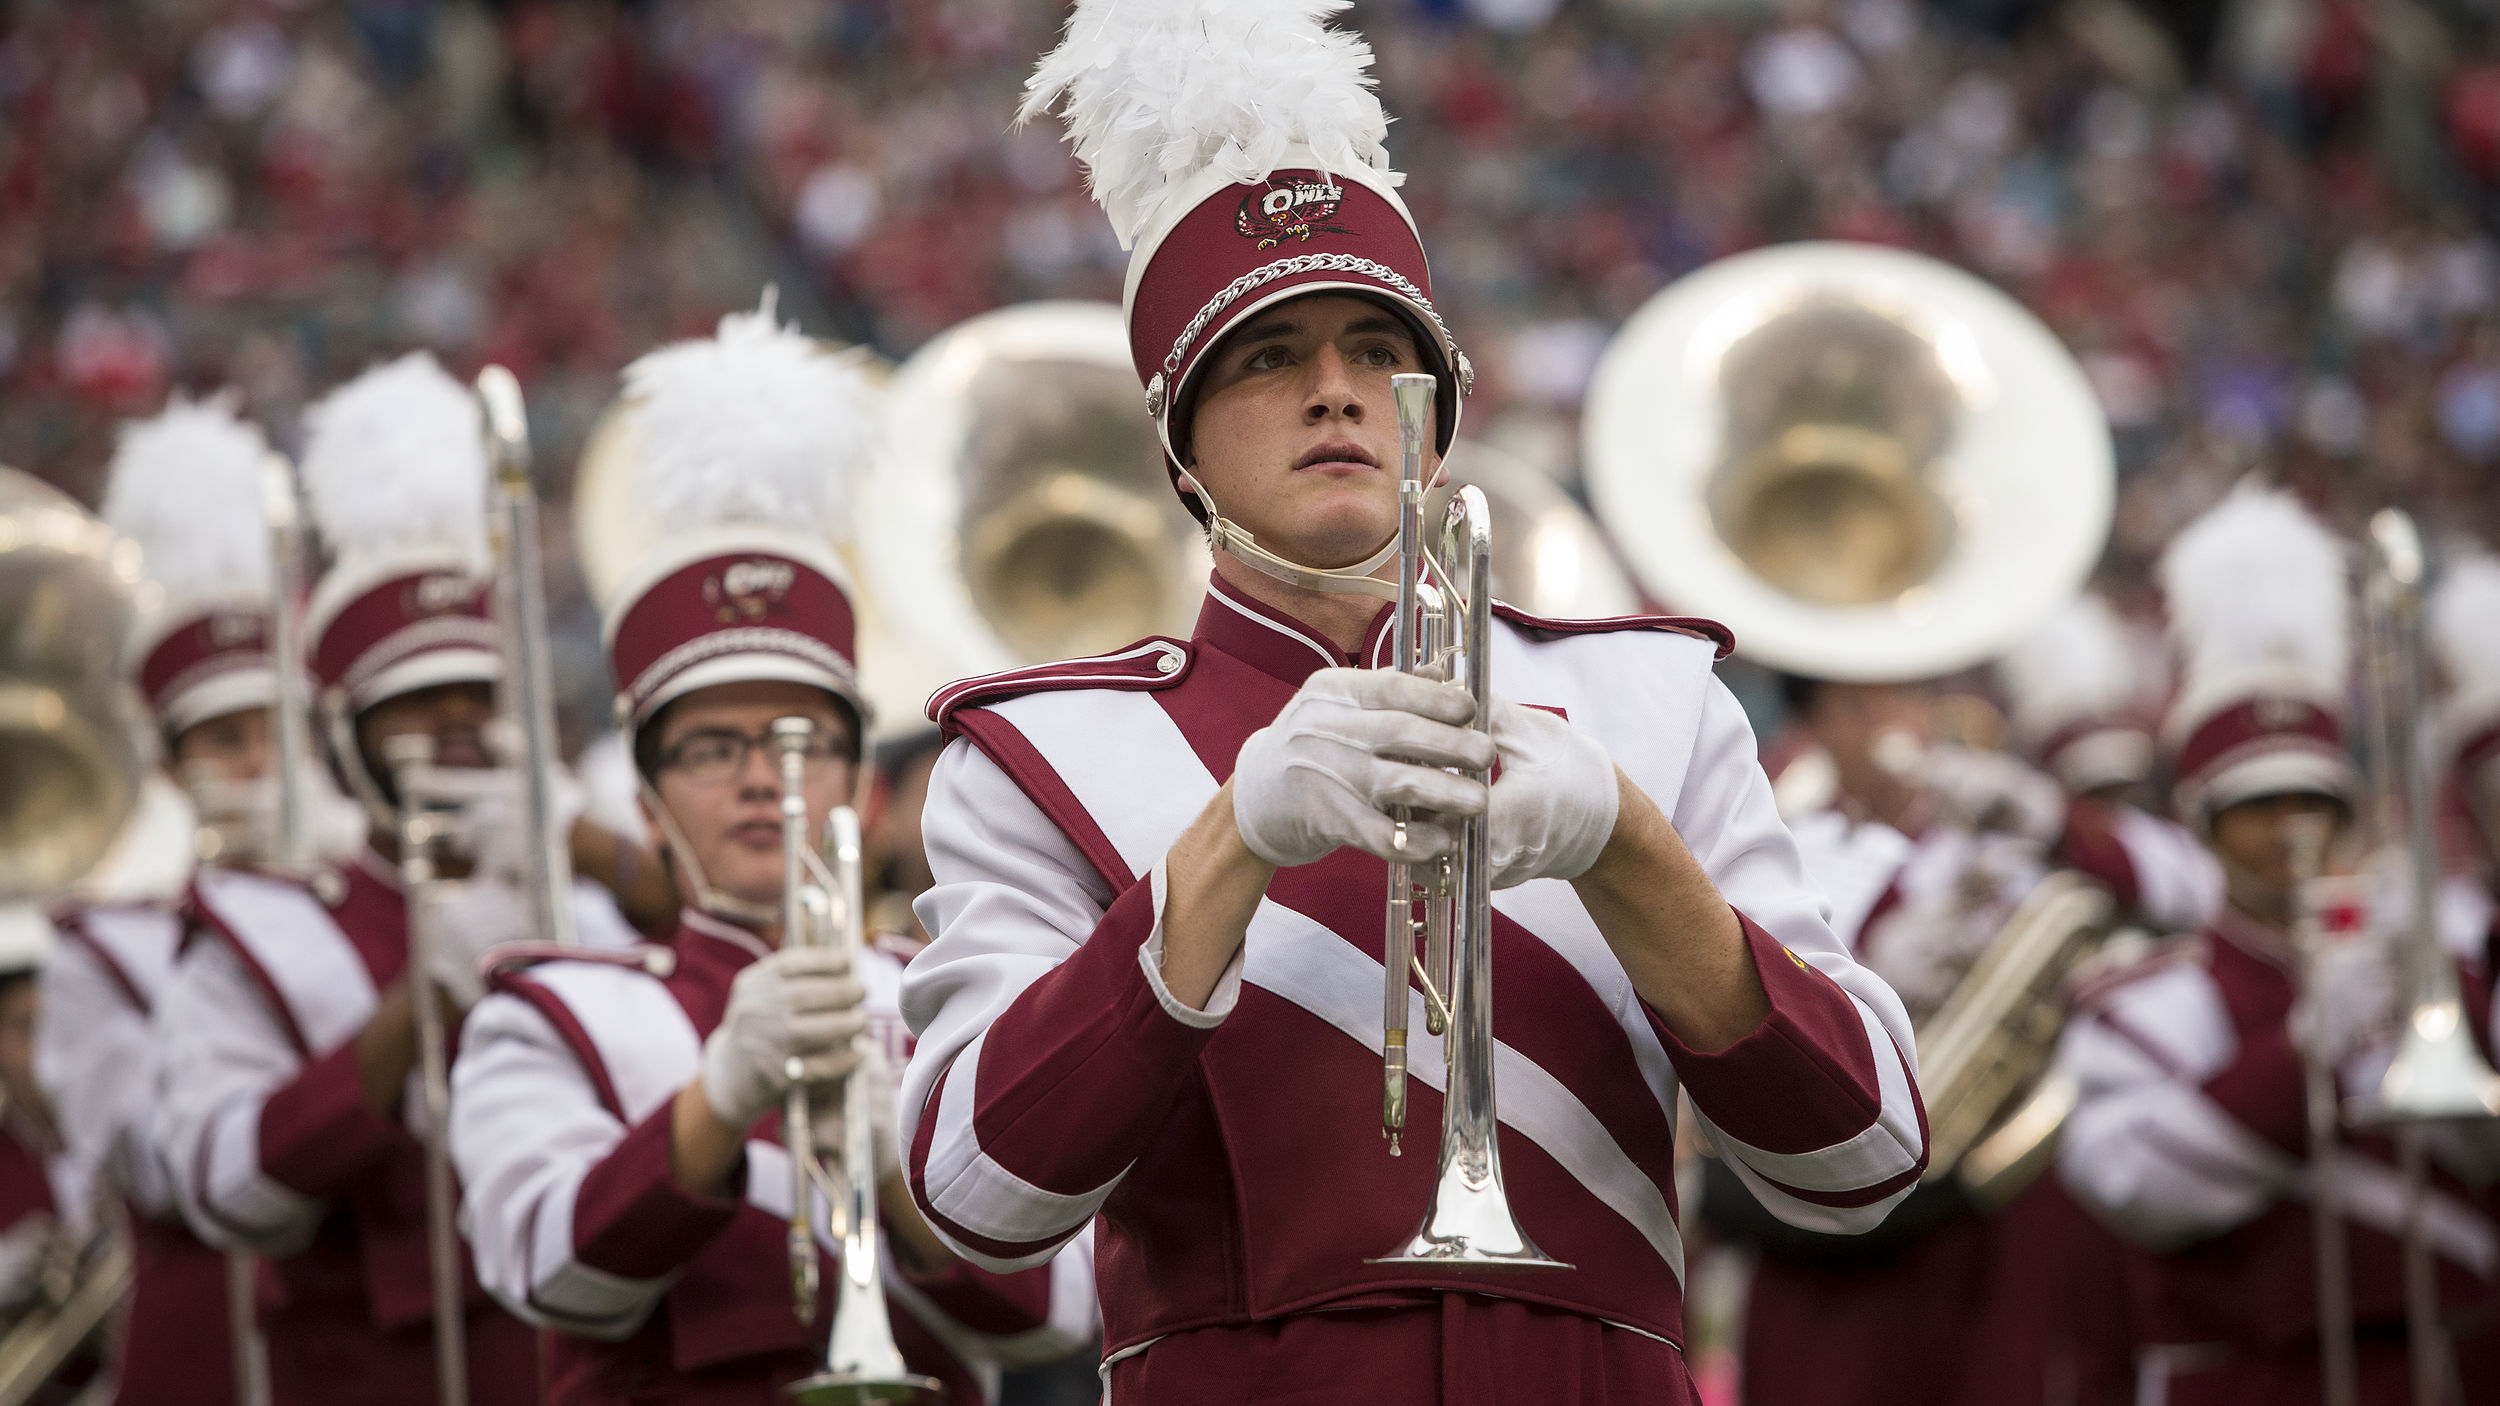 Temple's marching band.